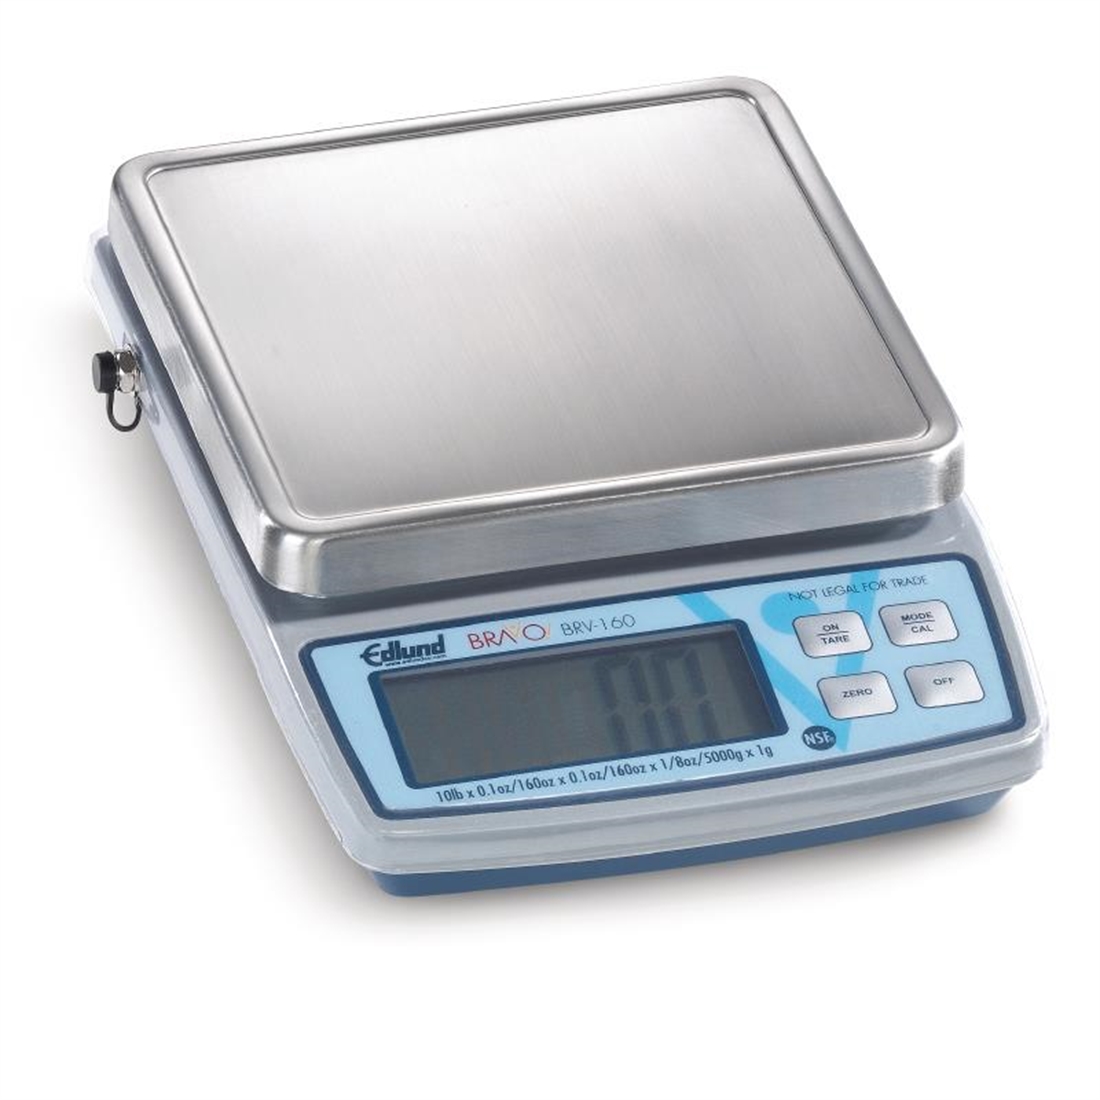 Edlund Bravo 160 Digital Scale with Clearshield Protective Cover 4.5Kg